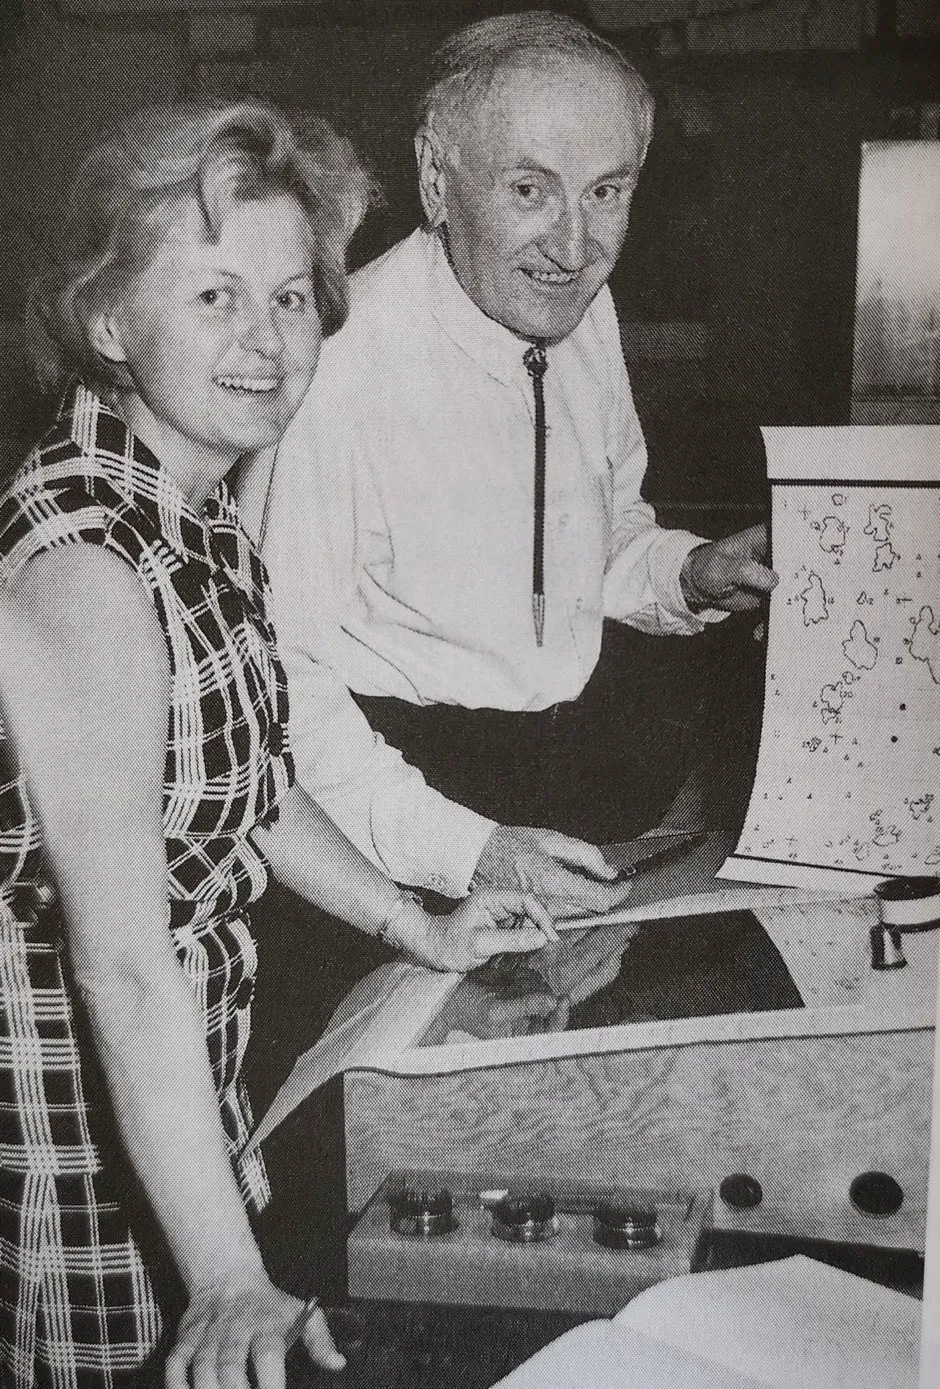 Zwicky with his wife Margrit in around 1965